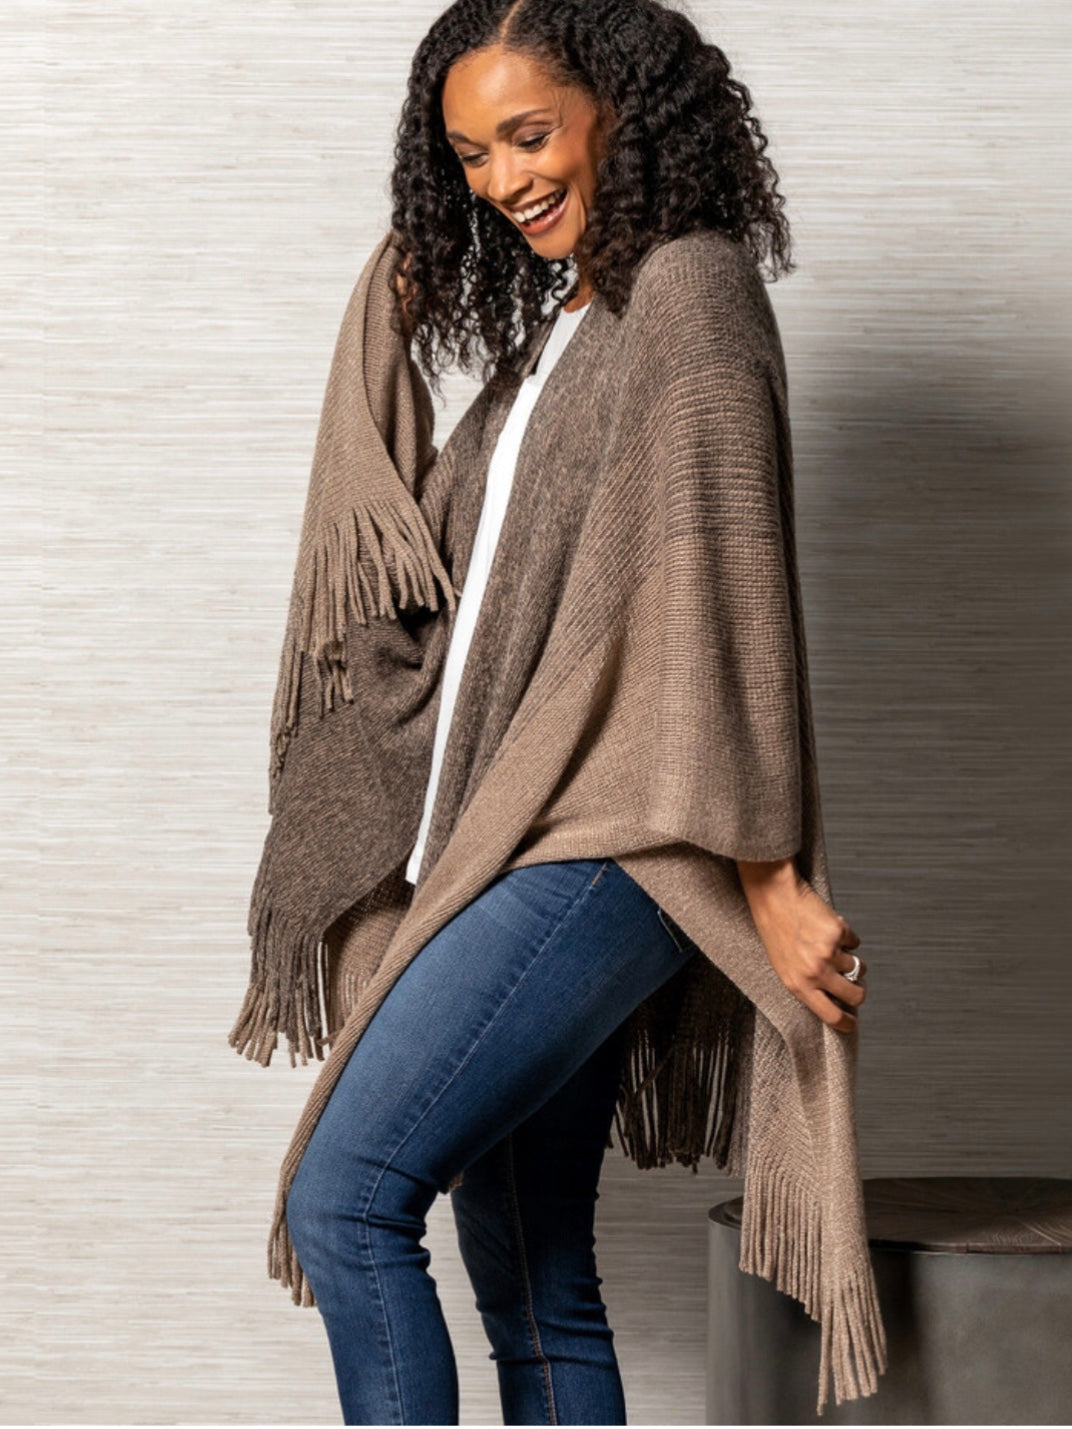 Taupe & Brown Knit Duster with Fringe